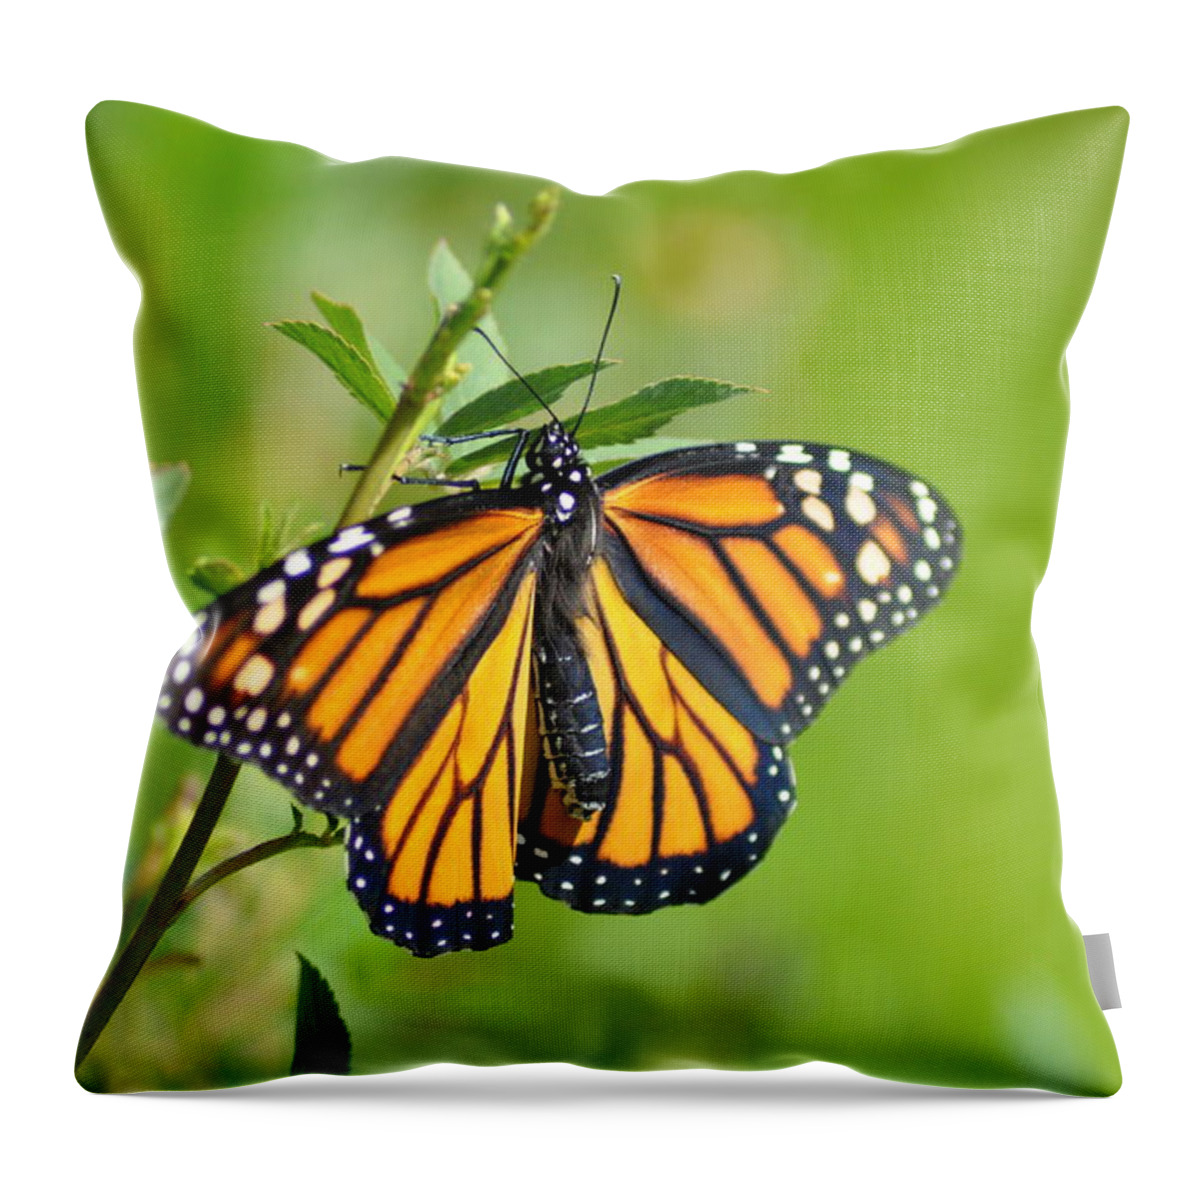 Butterfly Throw Pillow featuring the photograph Spread Your Wings by Bill Cannon